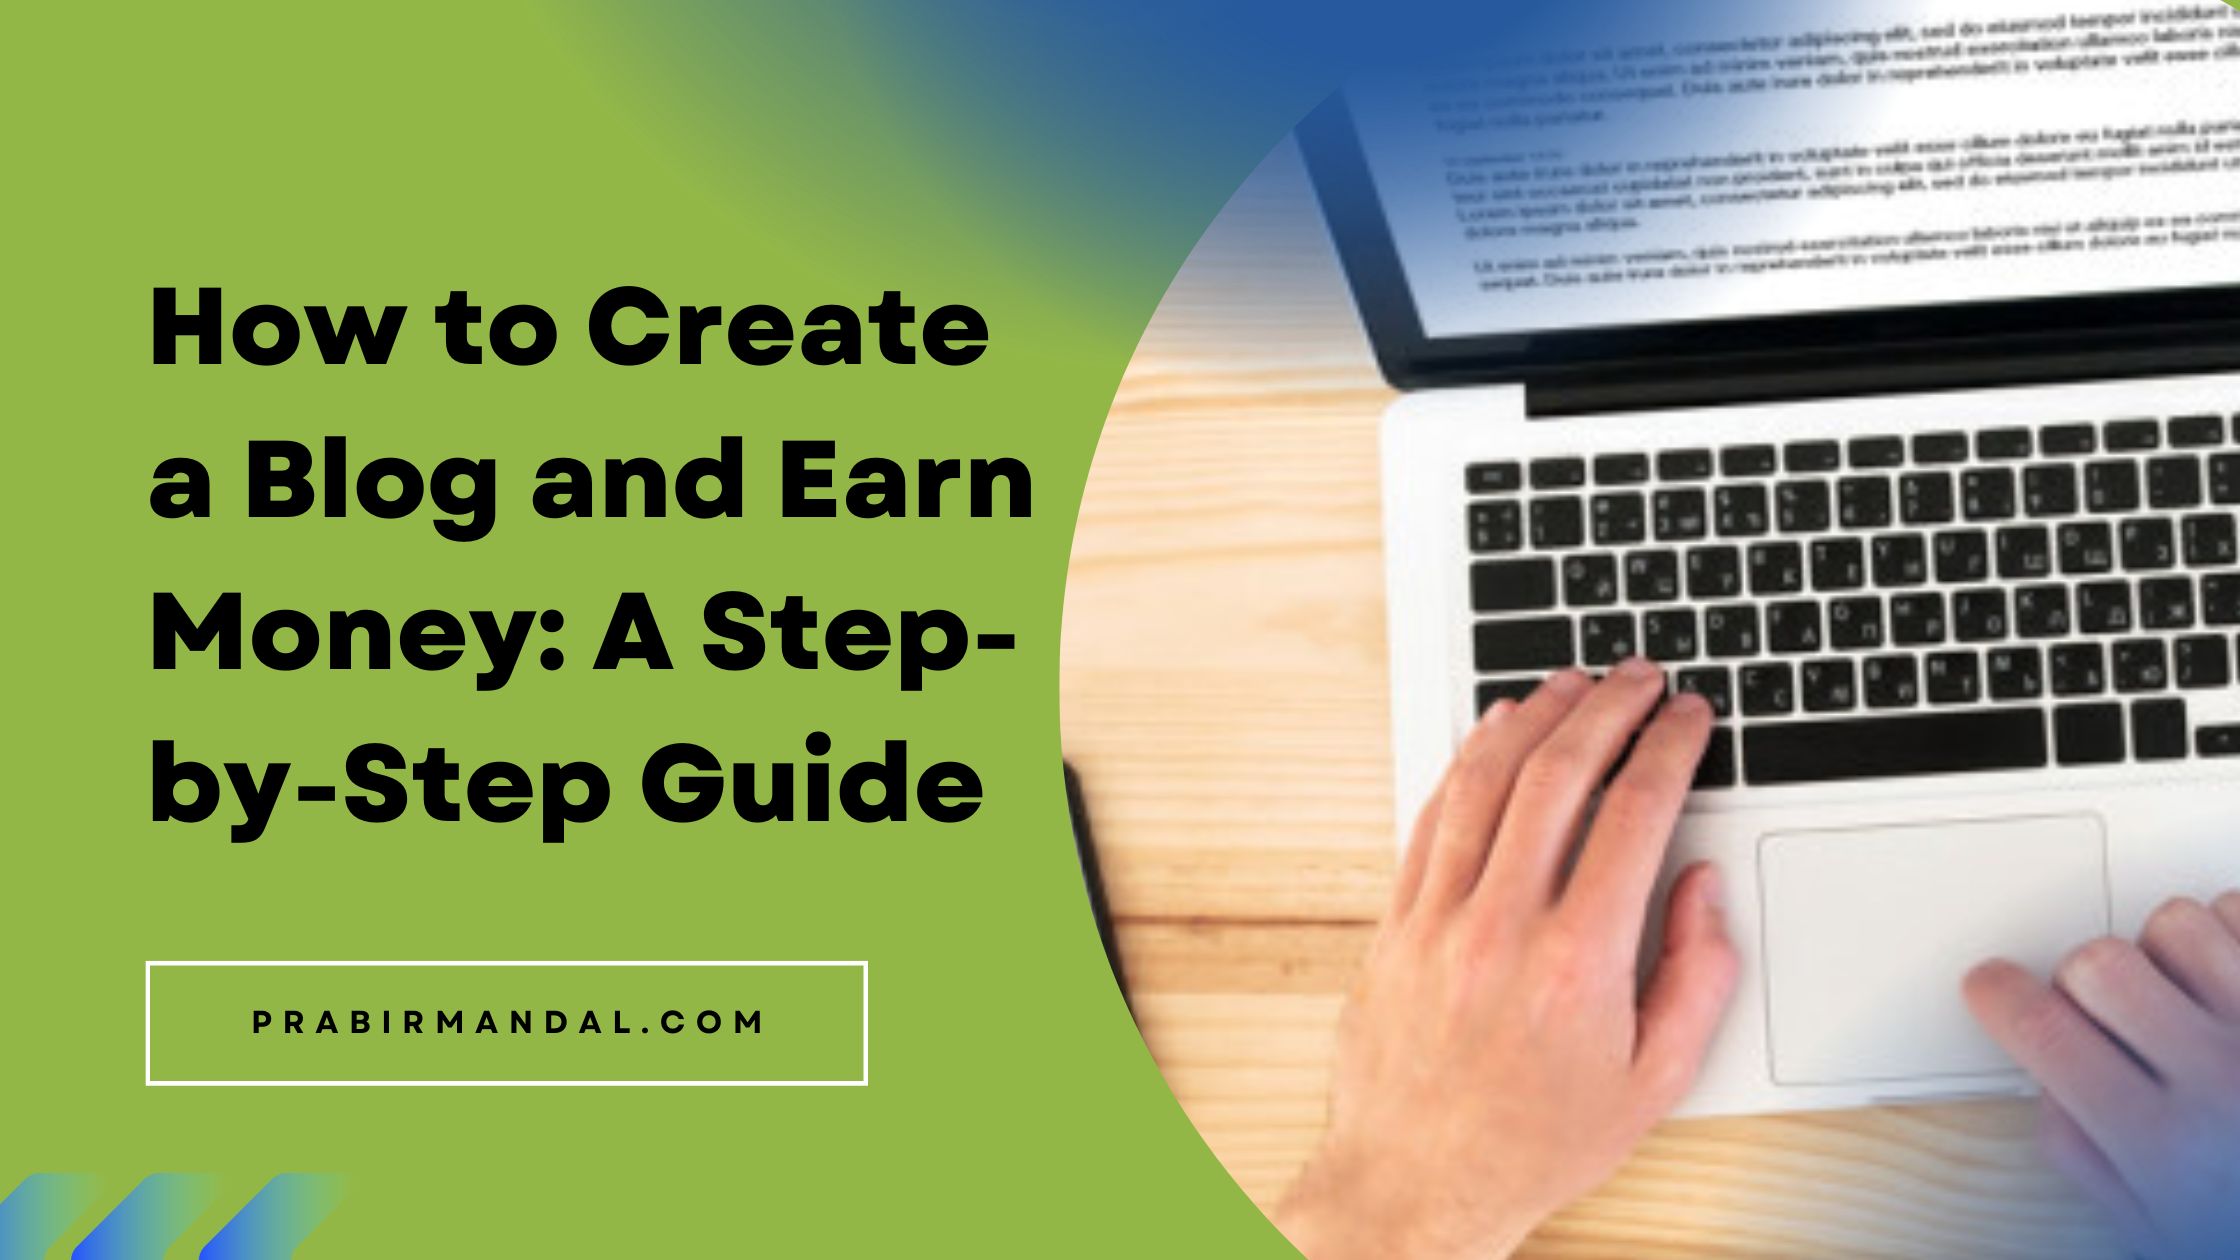 How to Create a Blog and Earn Money